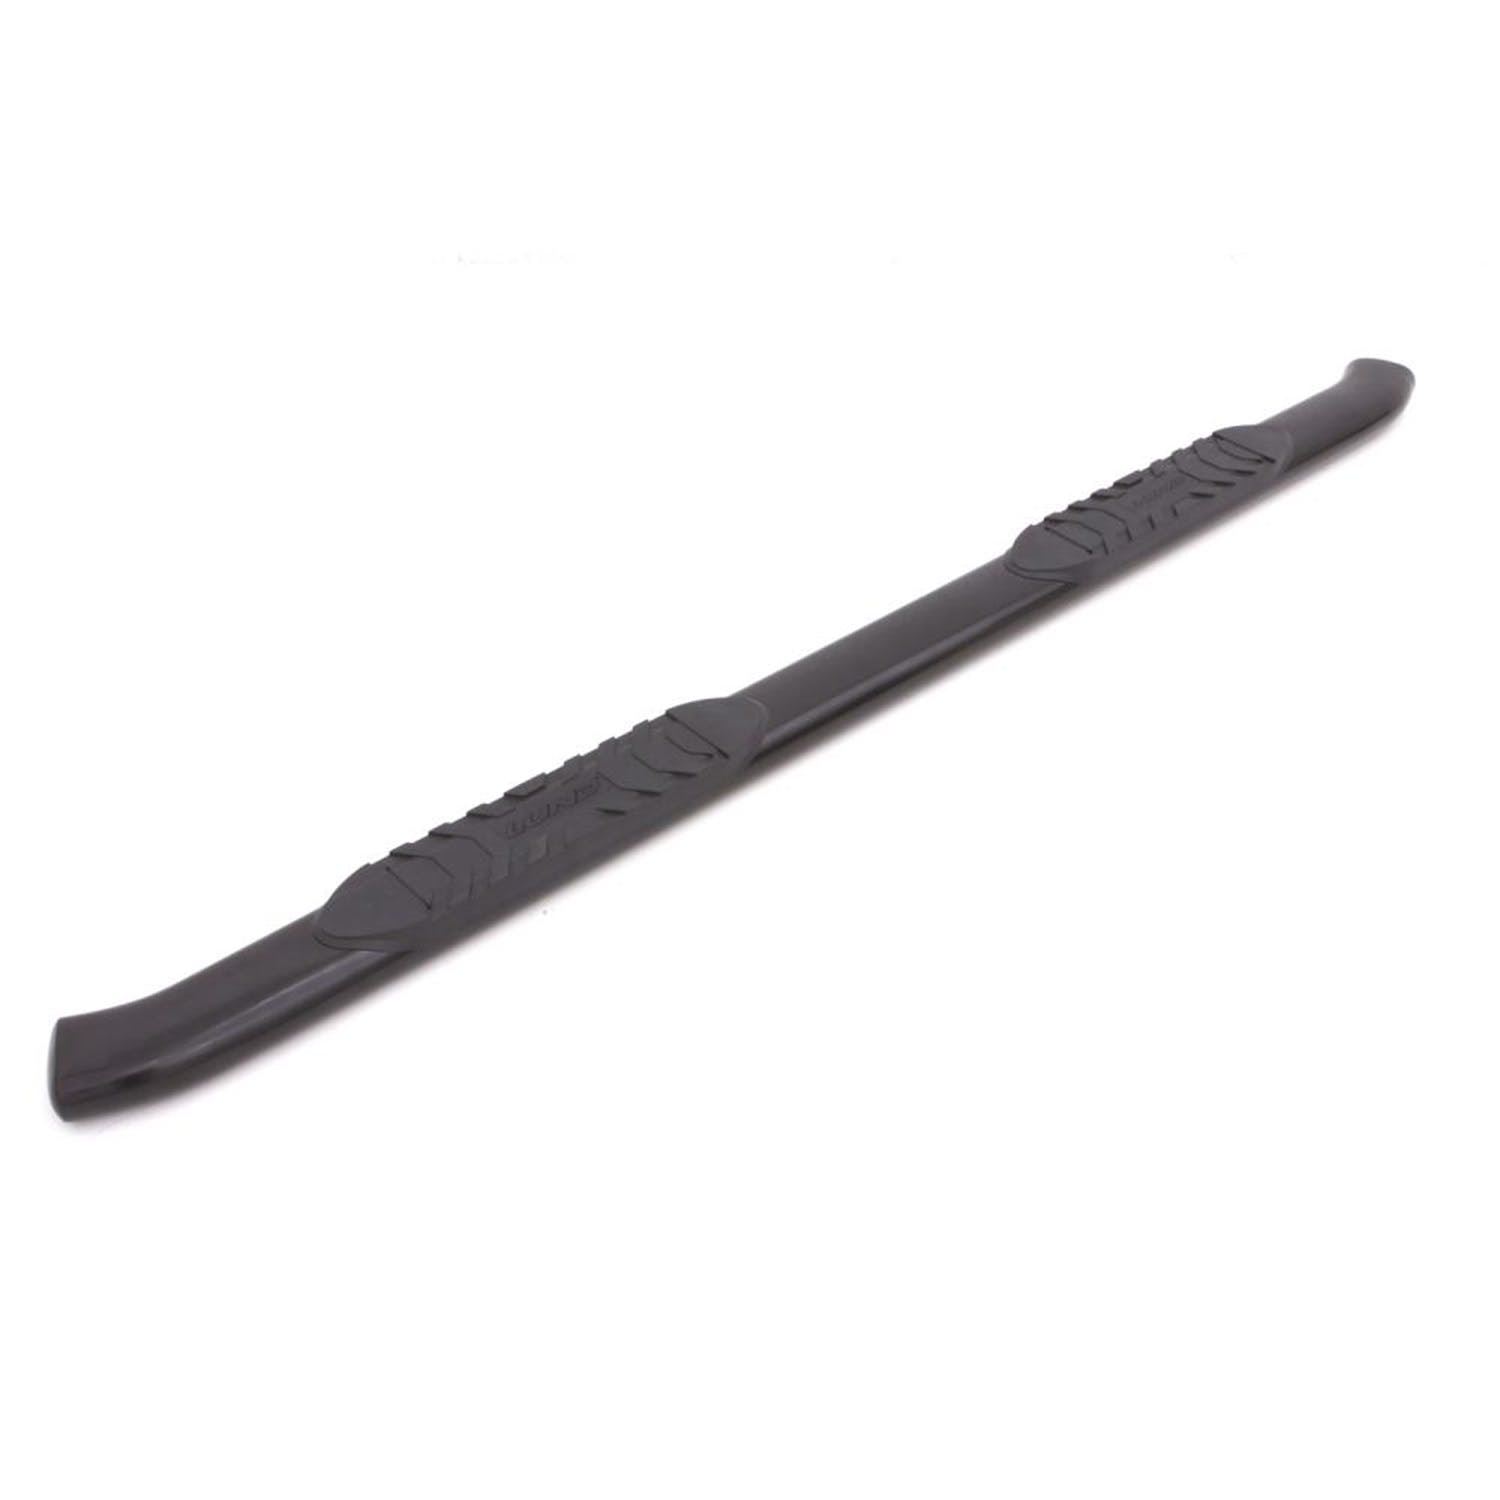 LUND 24210600 5 Inch Oval Curved Nerf Bar - Black LUND -5 inch CURVED OVAL BLACK SS